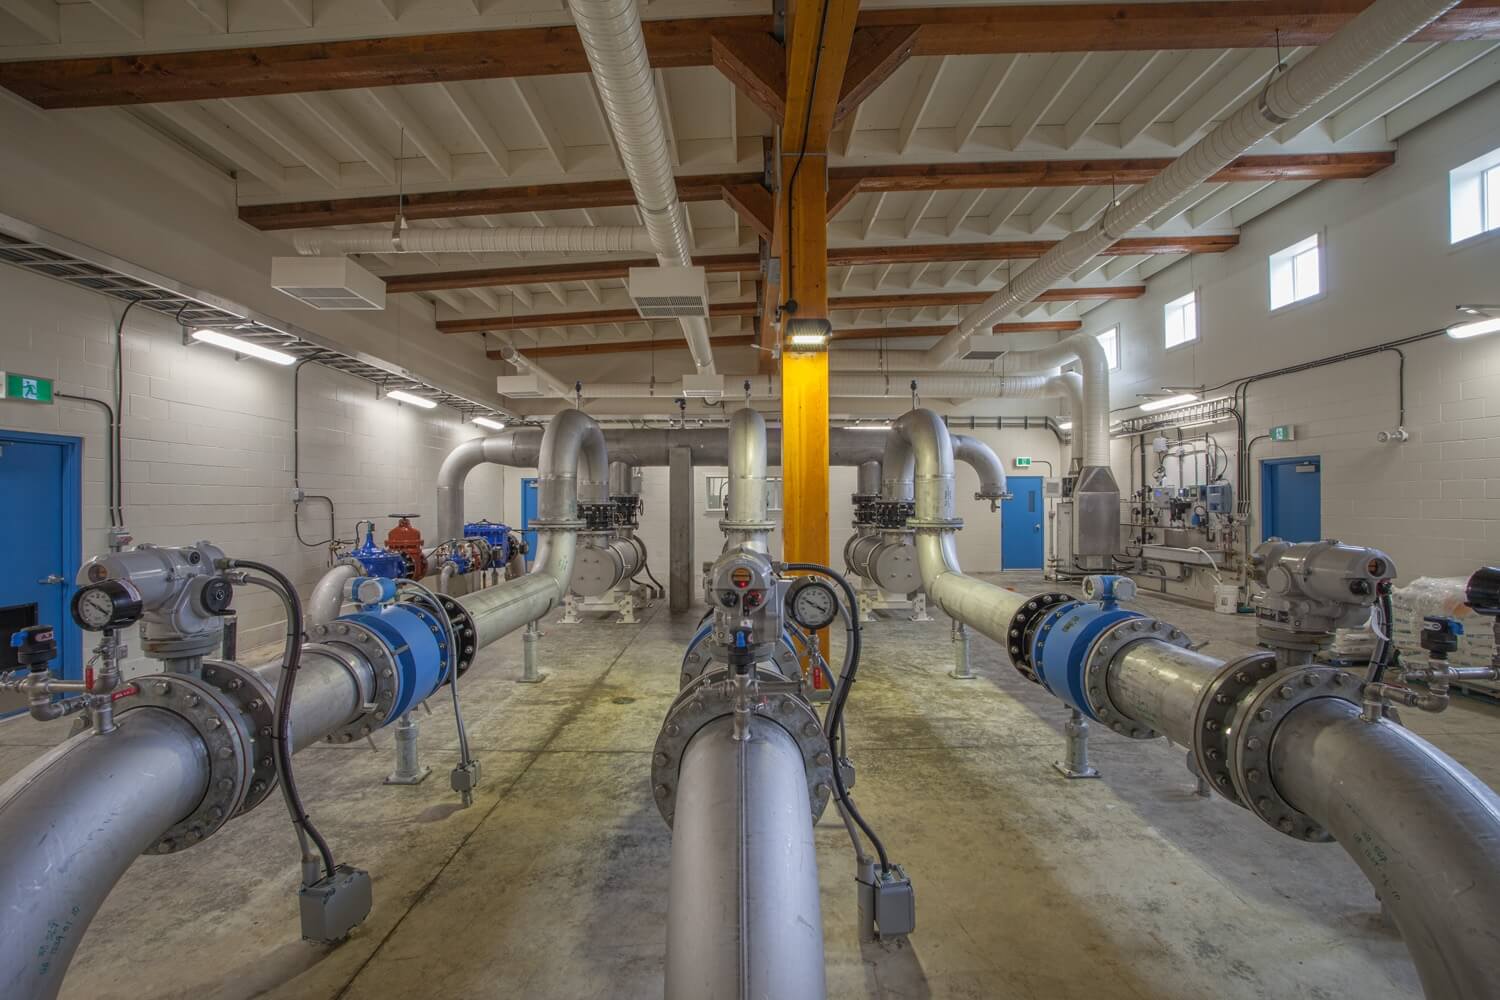 big plumbing pipes in water treatment plant